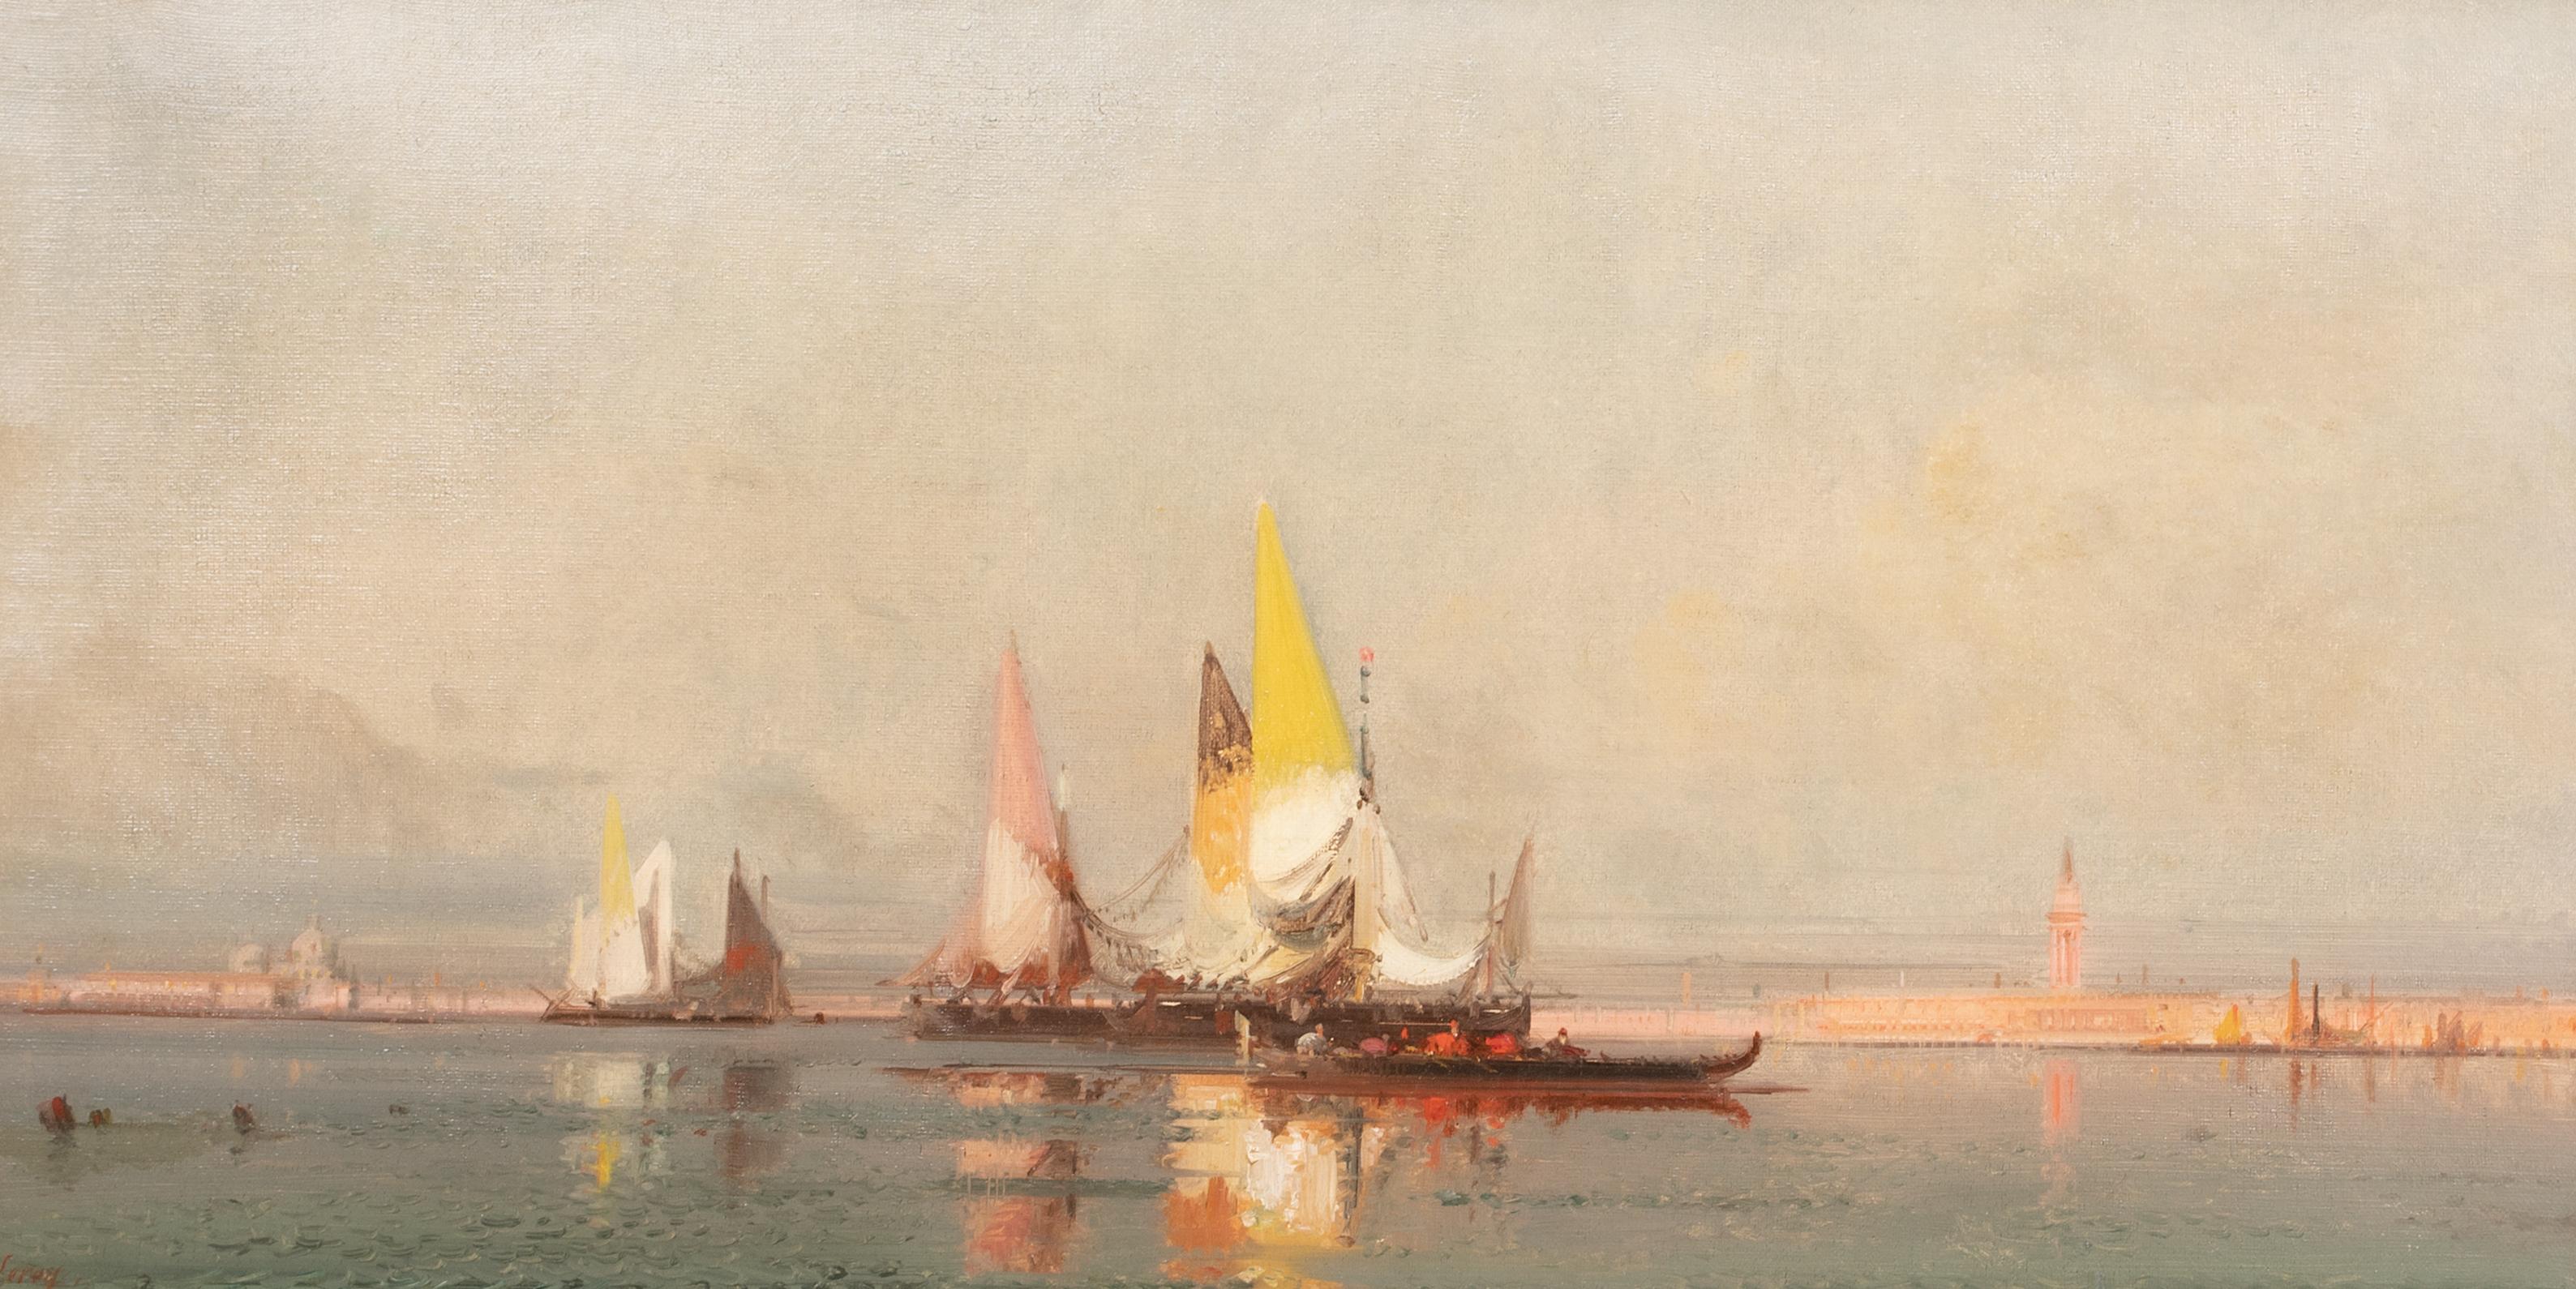 Ships Sailing In A Venice Lagon At Sunset, 19th Century

by Etienne Leroy (1828-1876) 

Large 19th Century Venetian Sunset view of ships sailing across the lagoon, oil on canvas by Etienne Leroy. Excellent quality and condition example of the